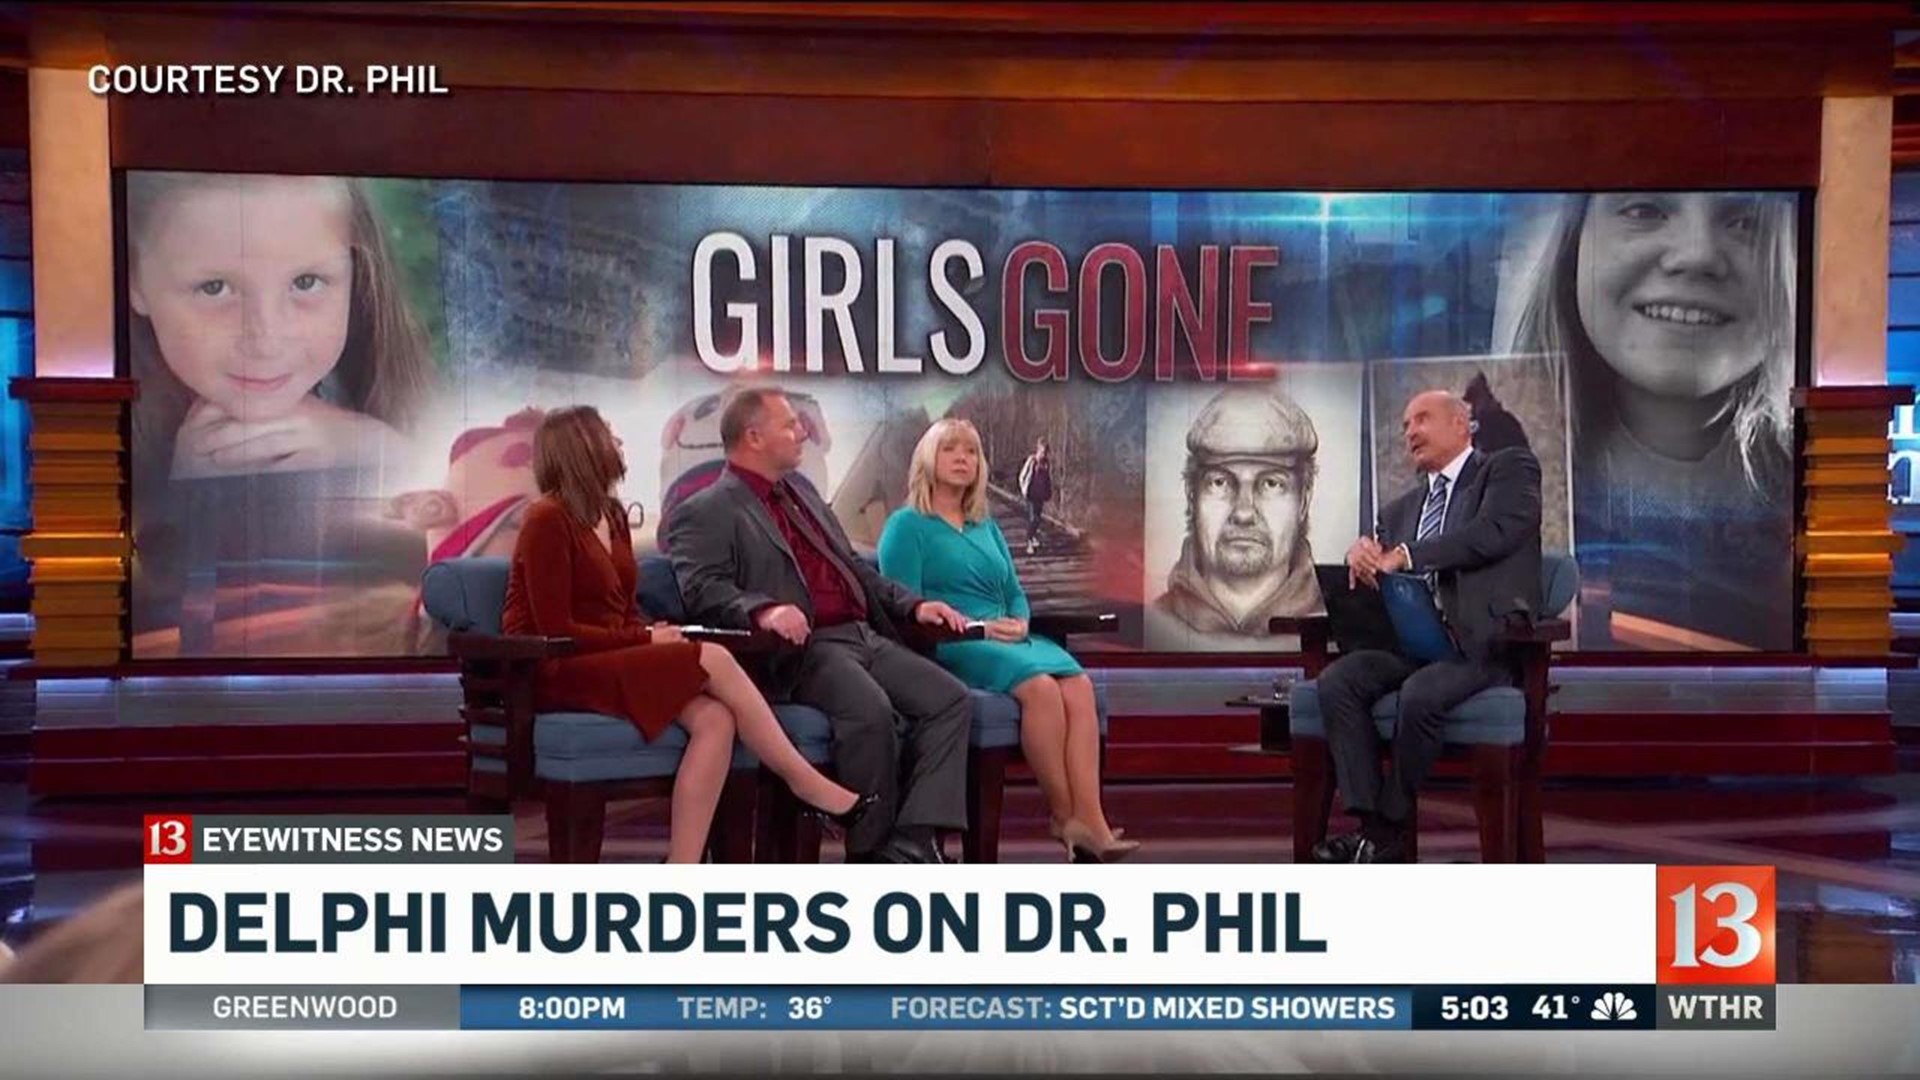 Delphi murders featured on Dr. Phil